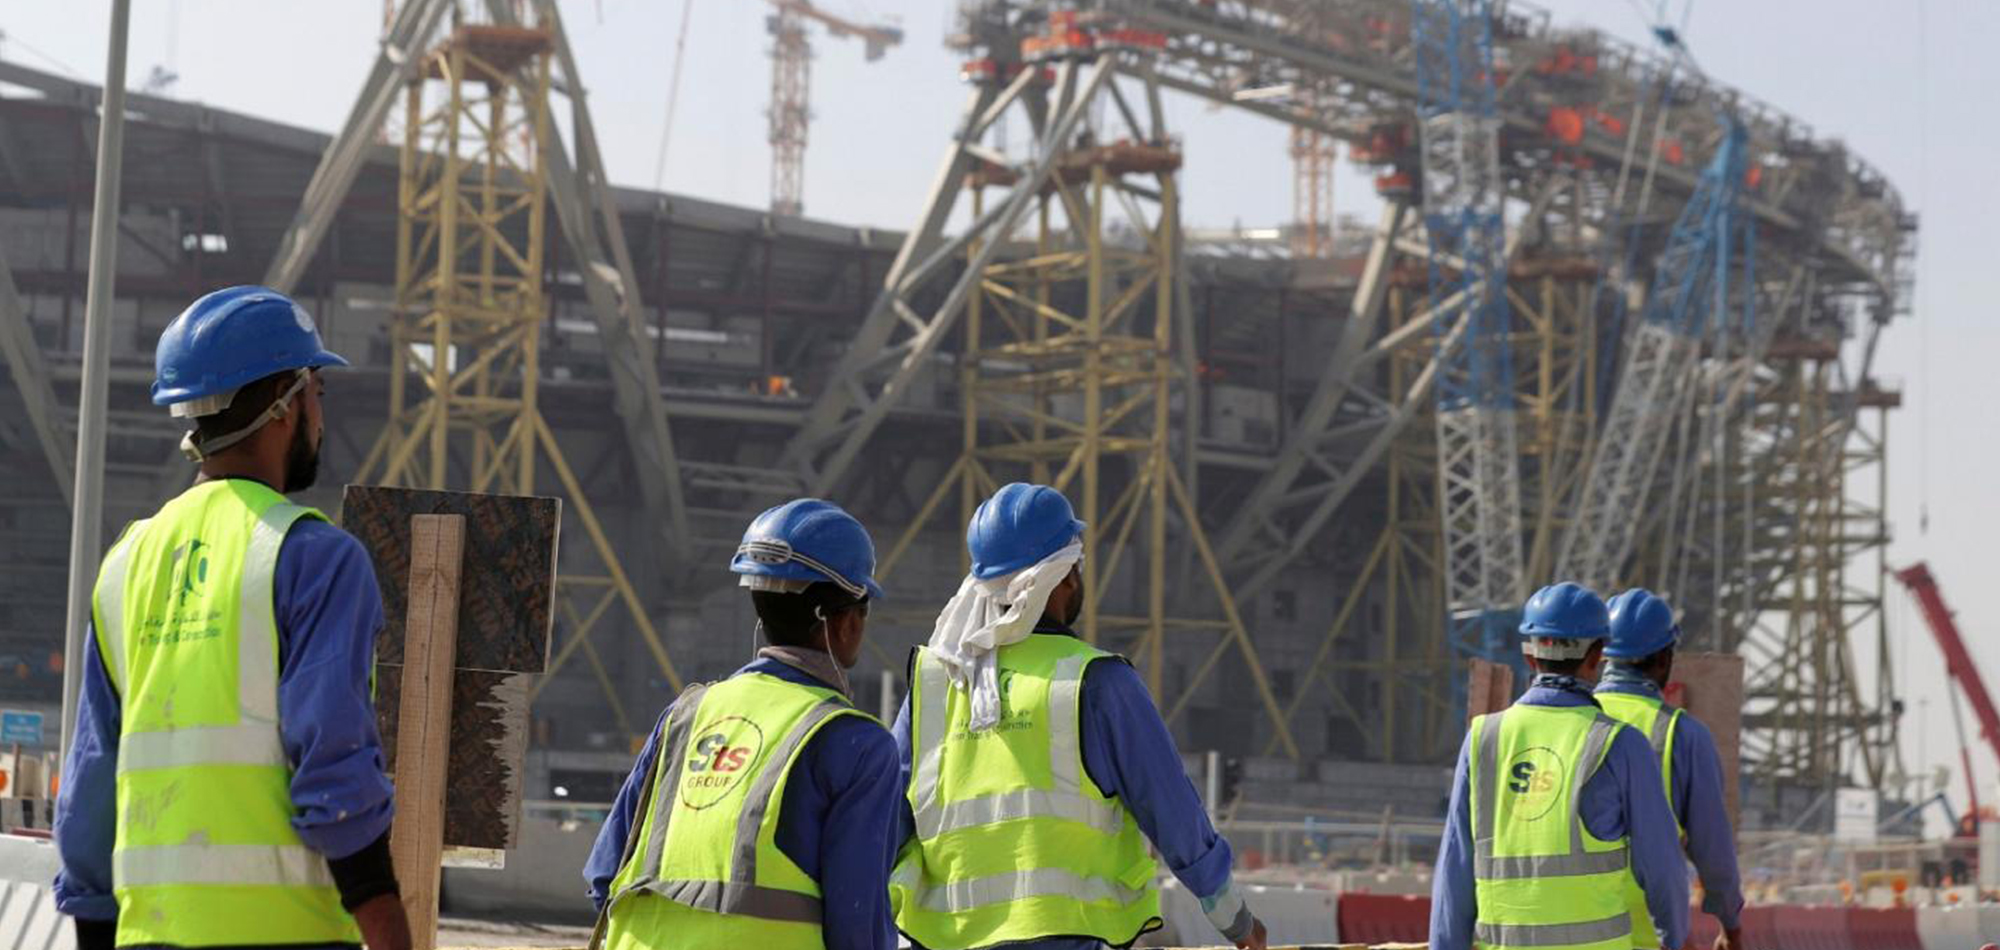 Dismantling the kafala system and introducing a minimum wage mark new era for Qatar labour market